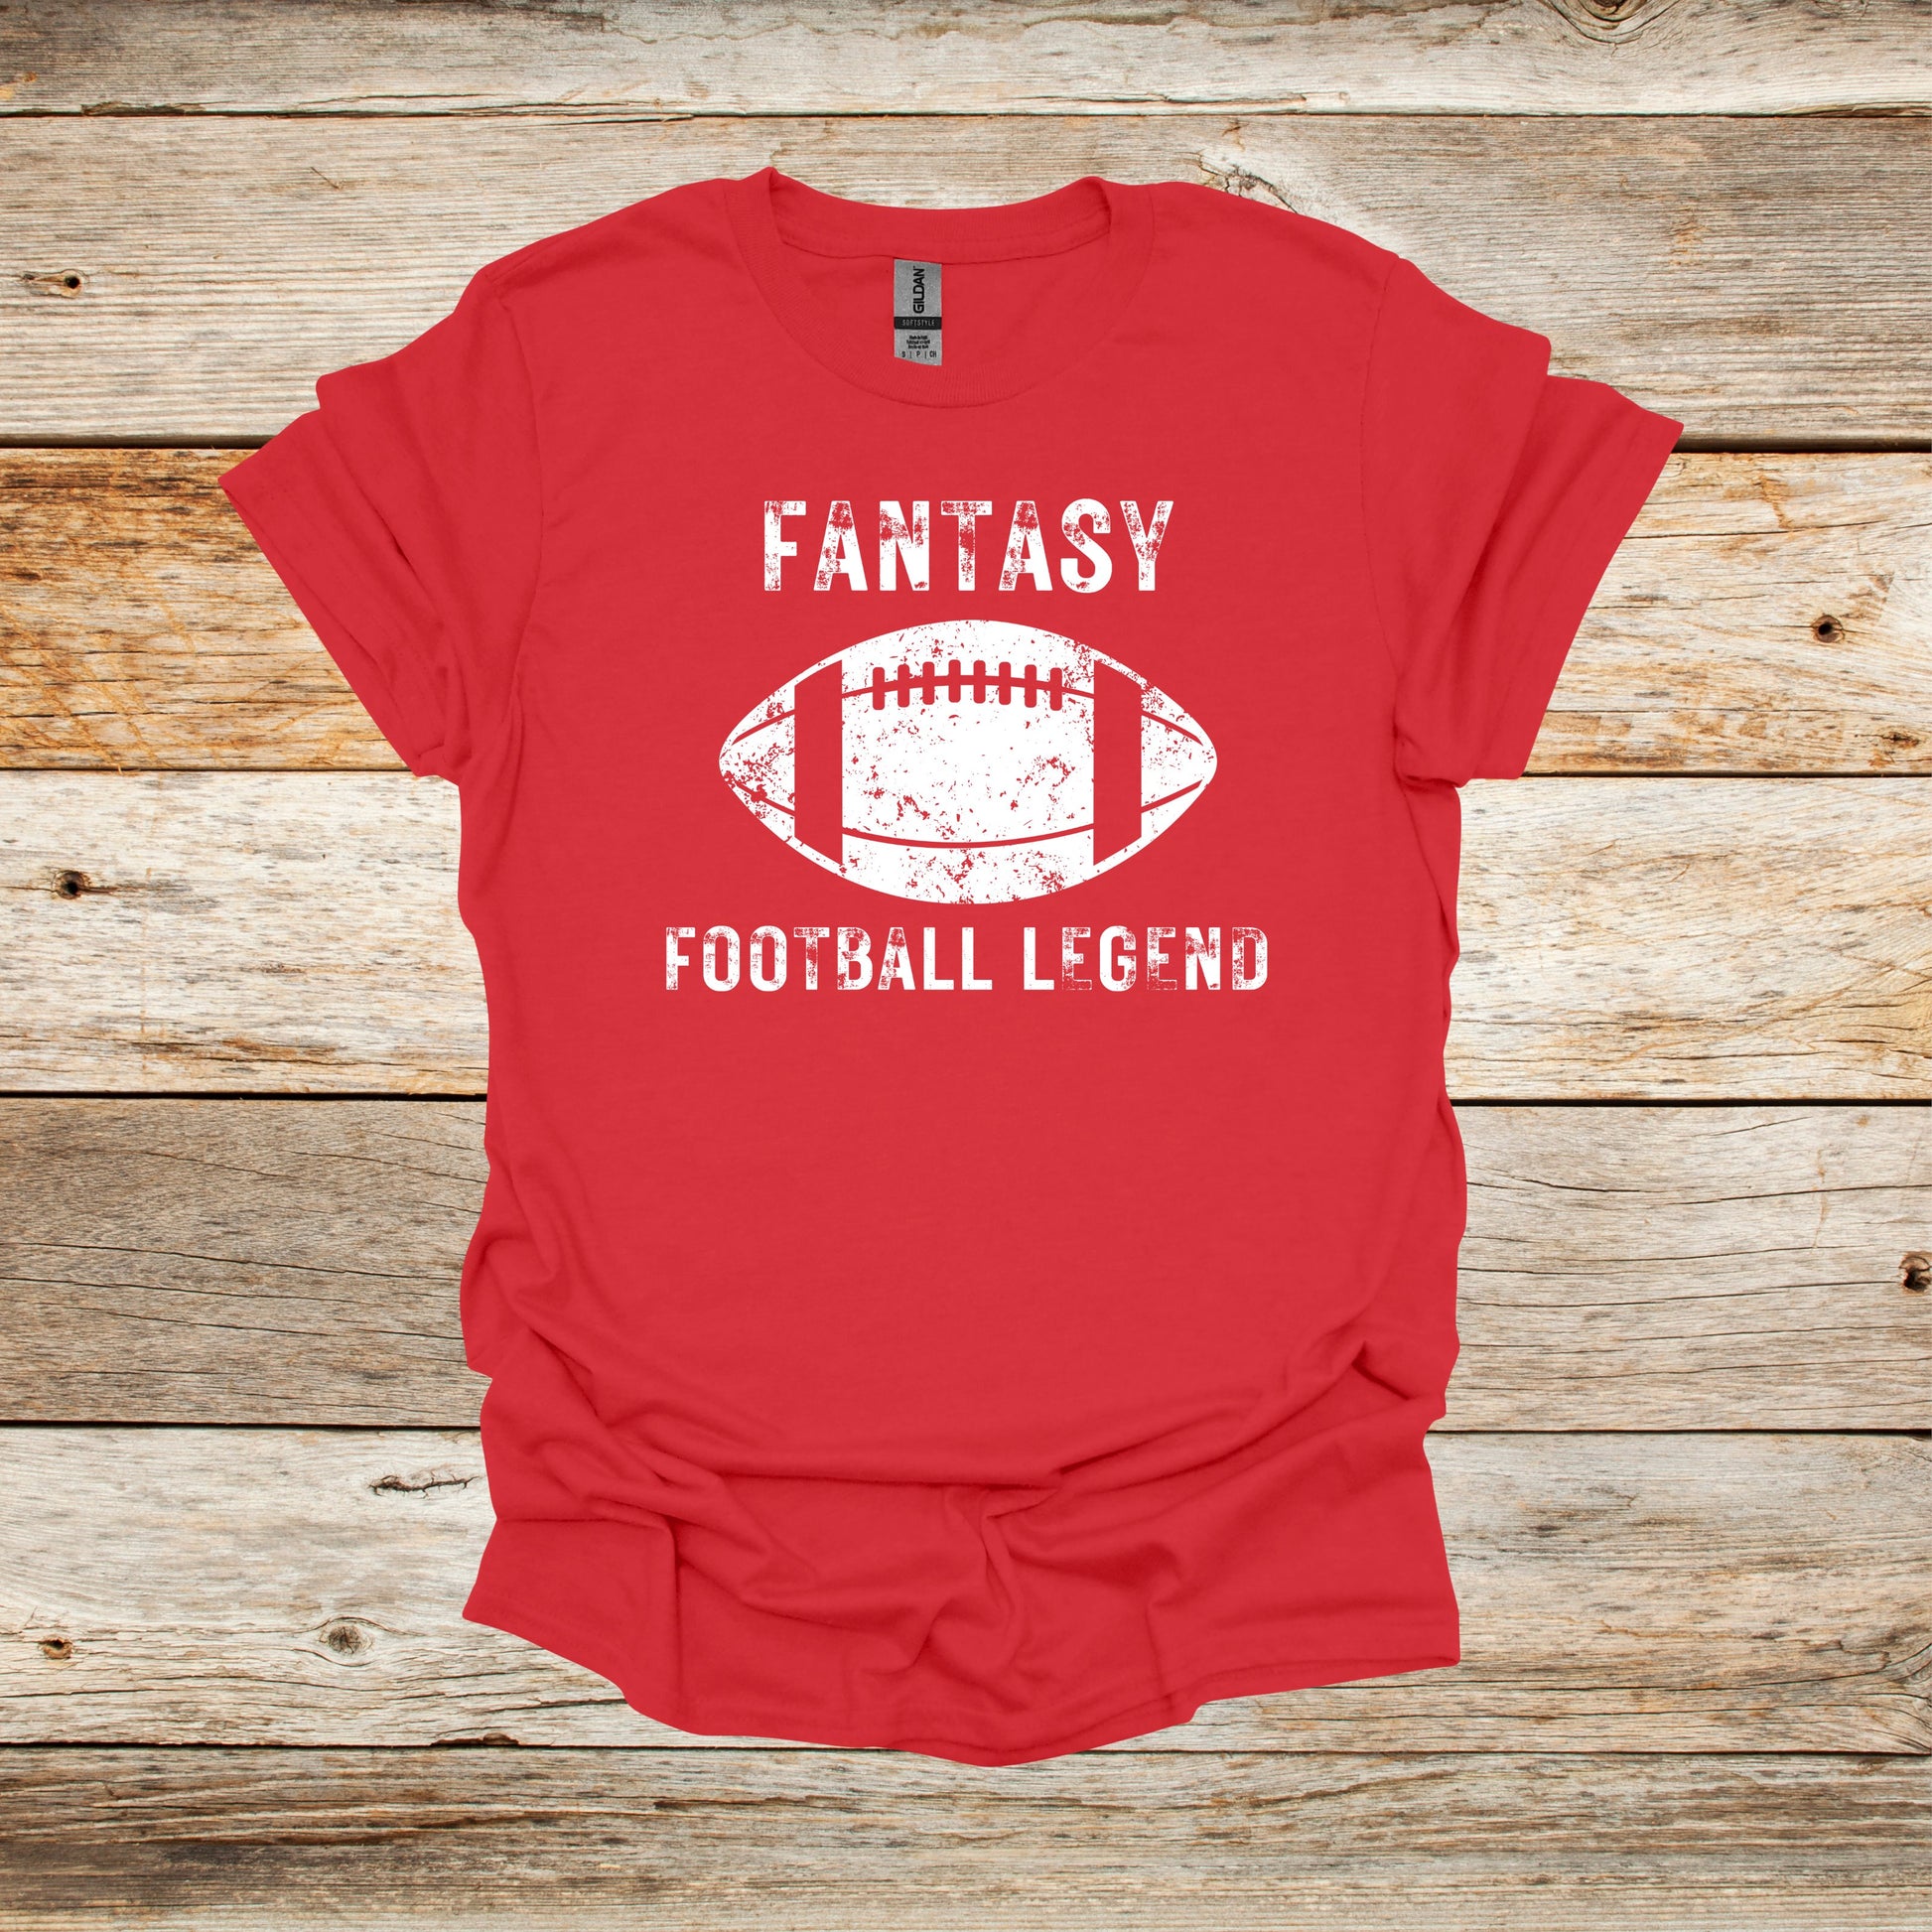 Football T-Shirt - Adult and Children's Tee Shirts - Fantasy Football - Sports T-Shirts Graphic Avenue Red Adult Small 